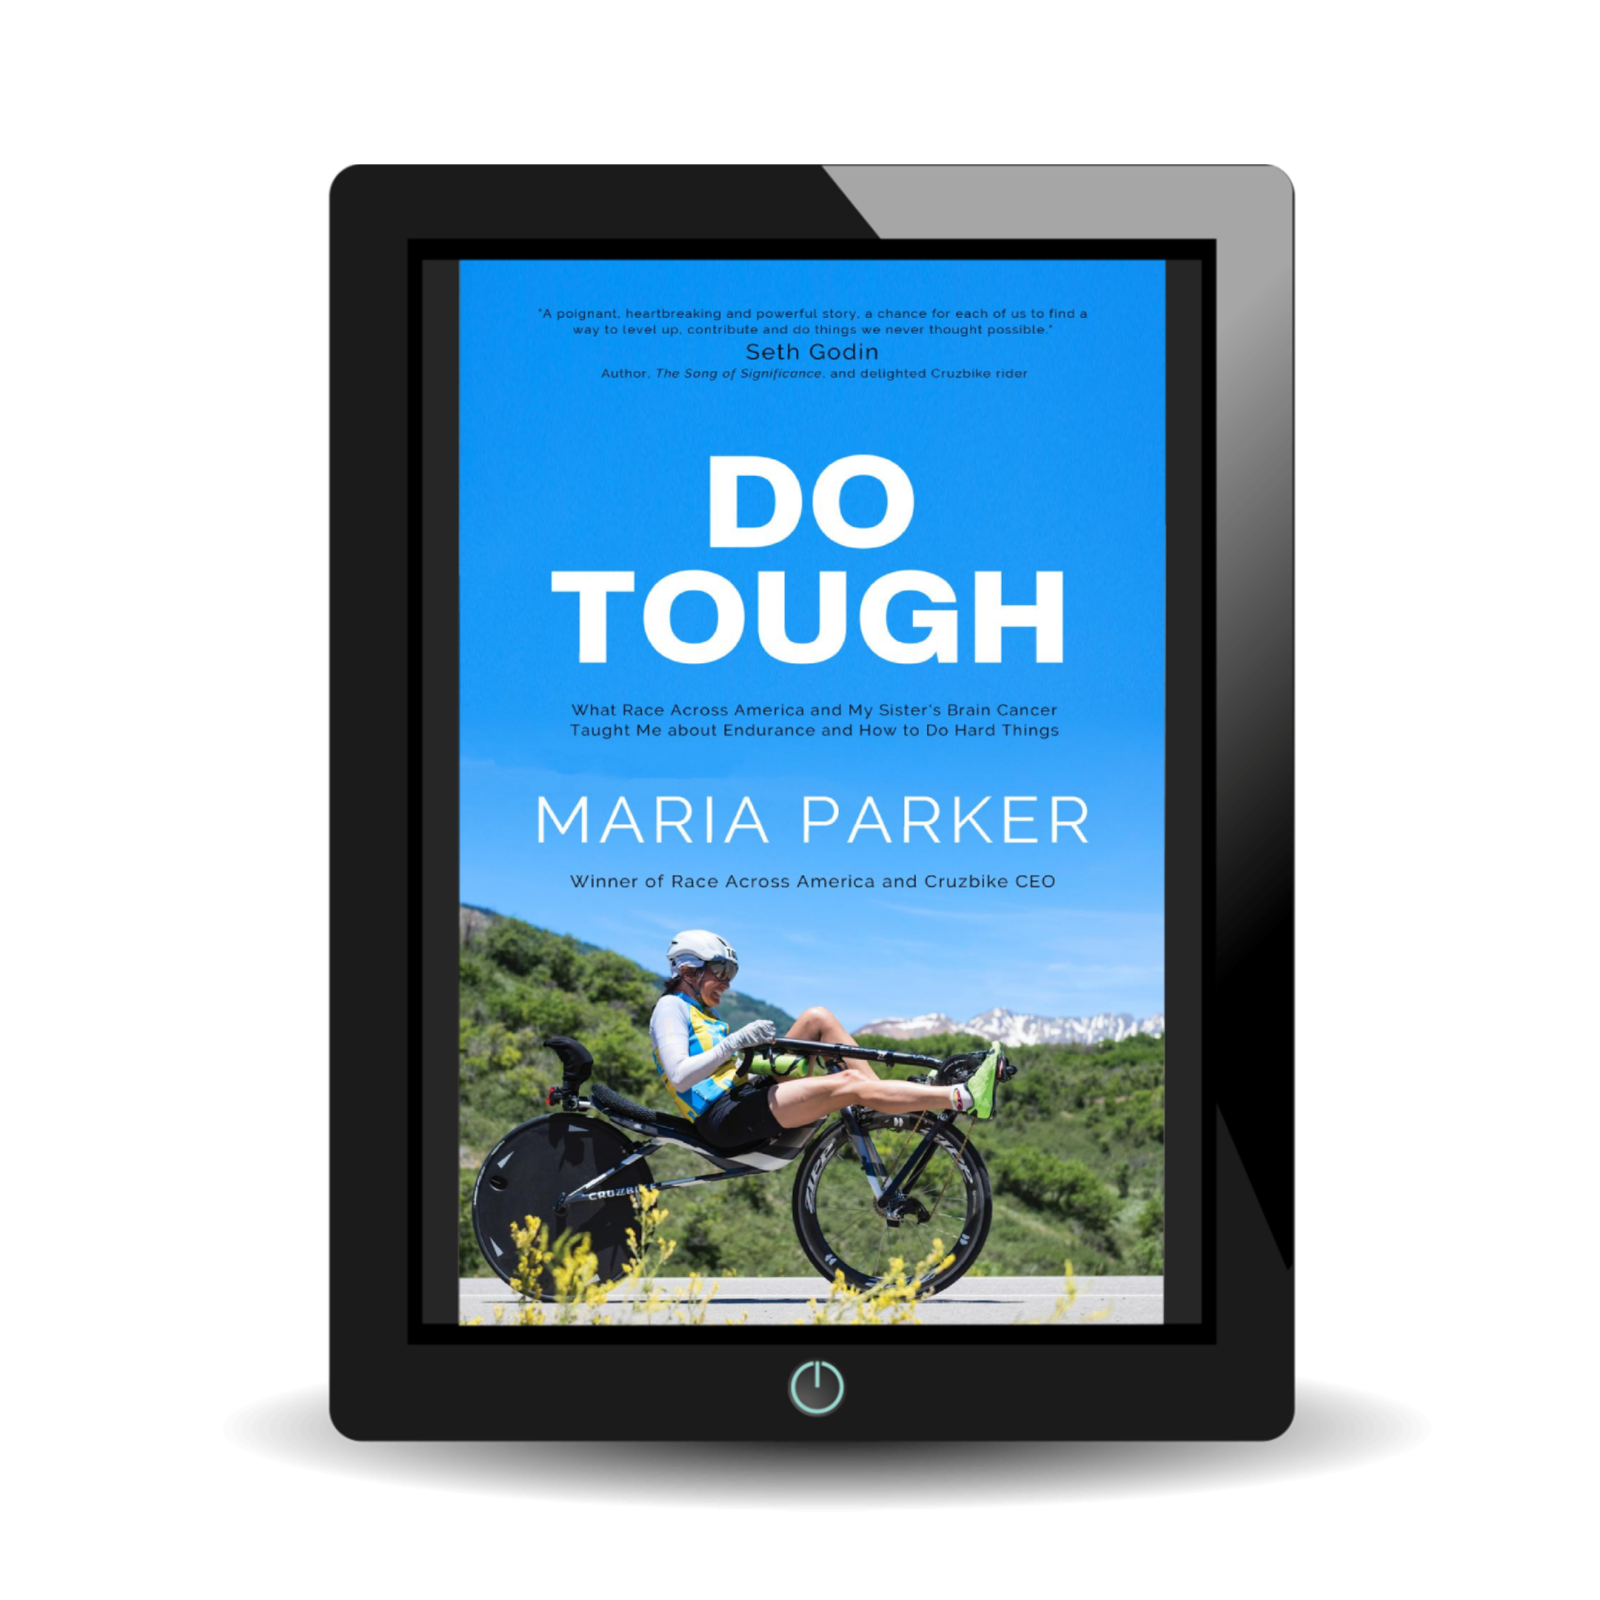 Do Tough: What Race Across America and My Sister's Brain Cancer Taught Me about Endurance and How to Do Hard Thing